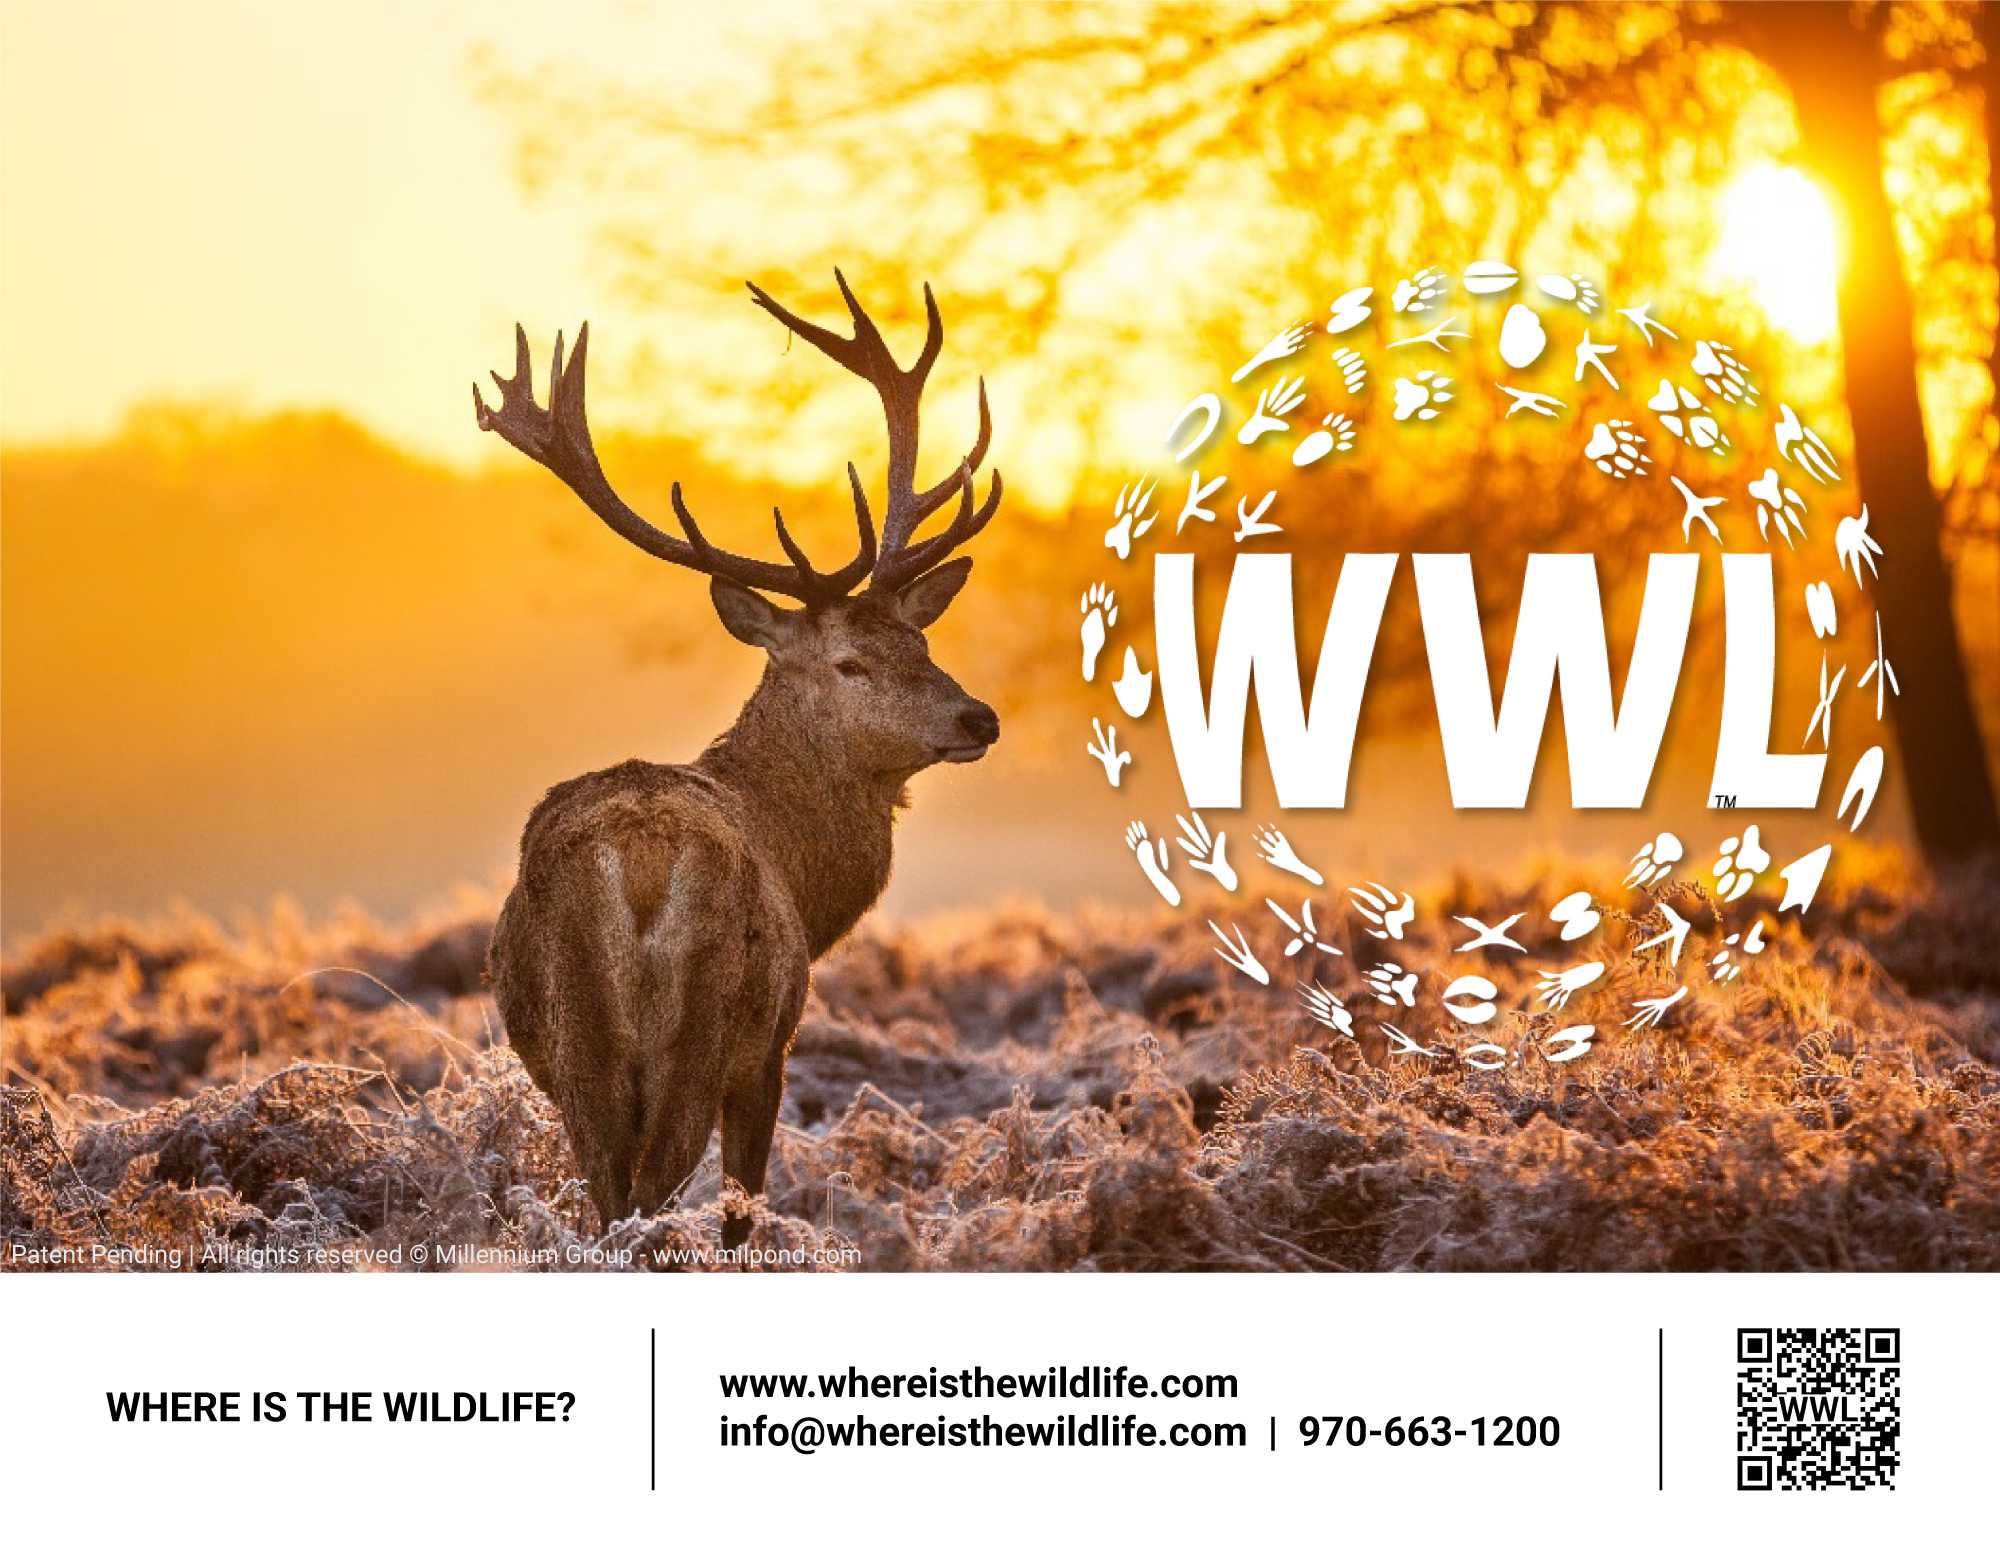 where is the wildlife: wildlife viewing www.whereisthewildlife.com info@whereisthewildlife.com970-663-1200